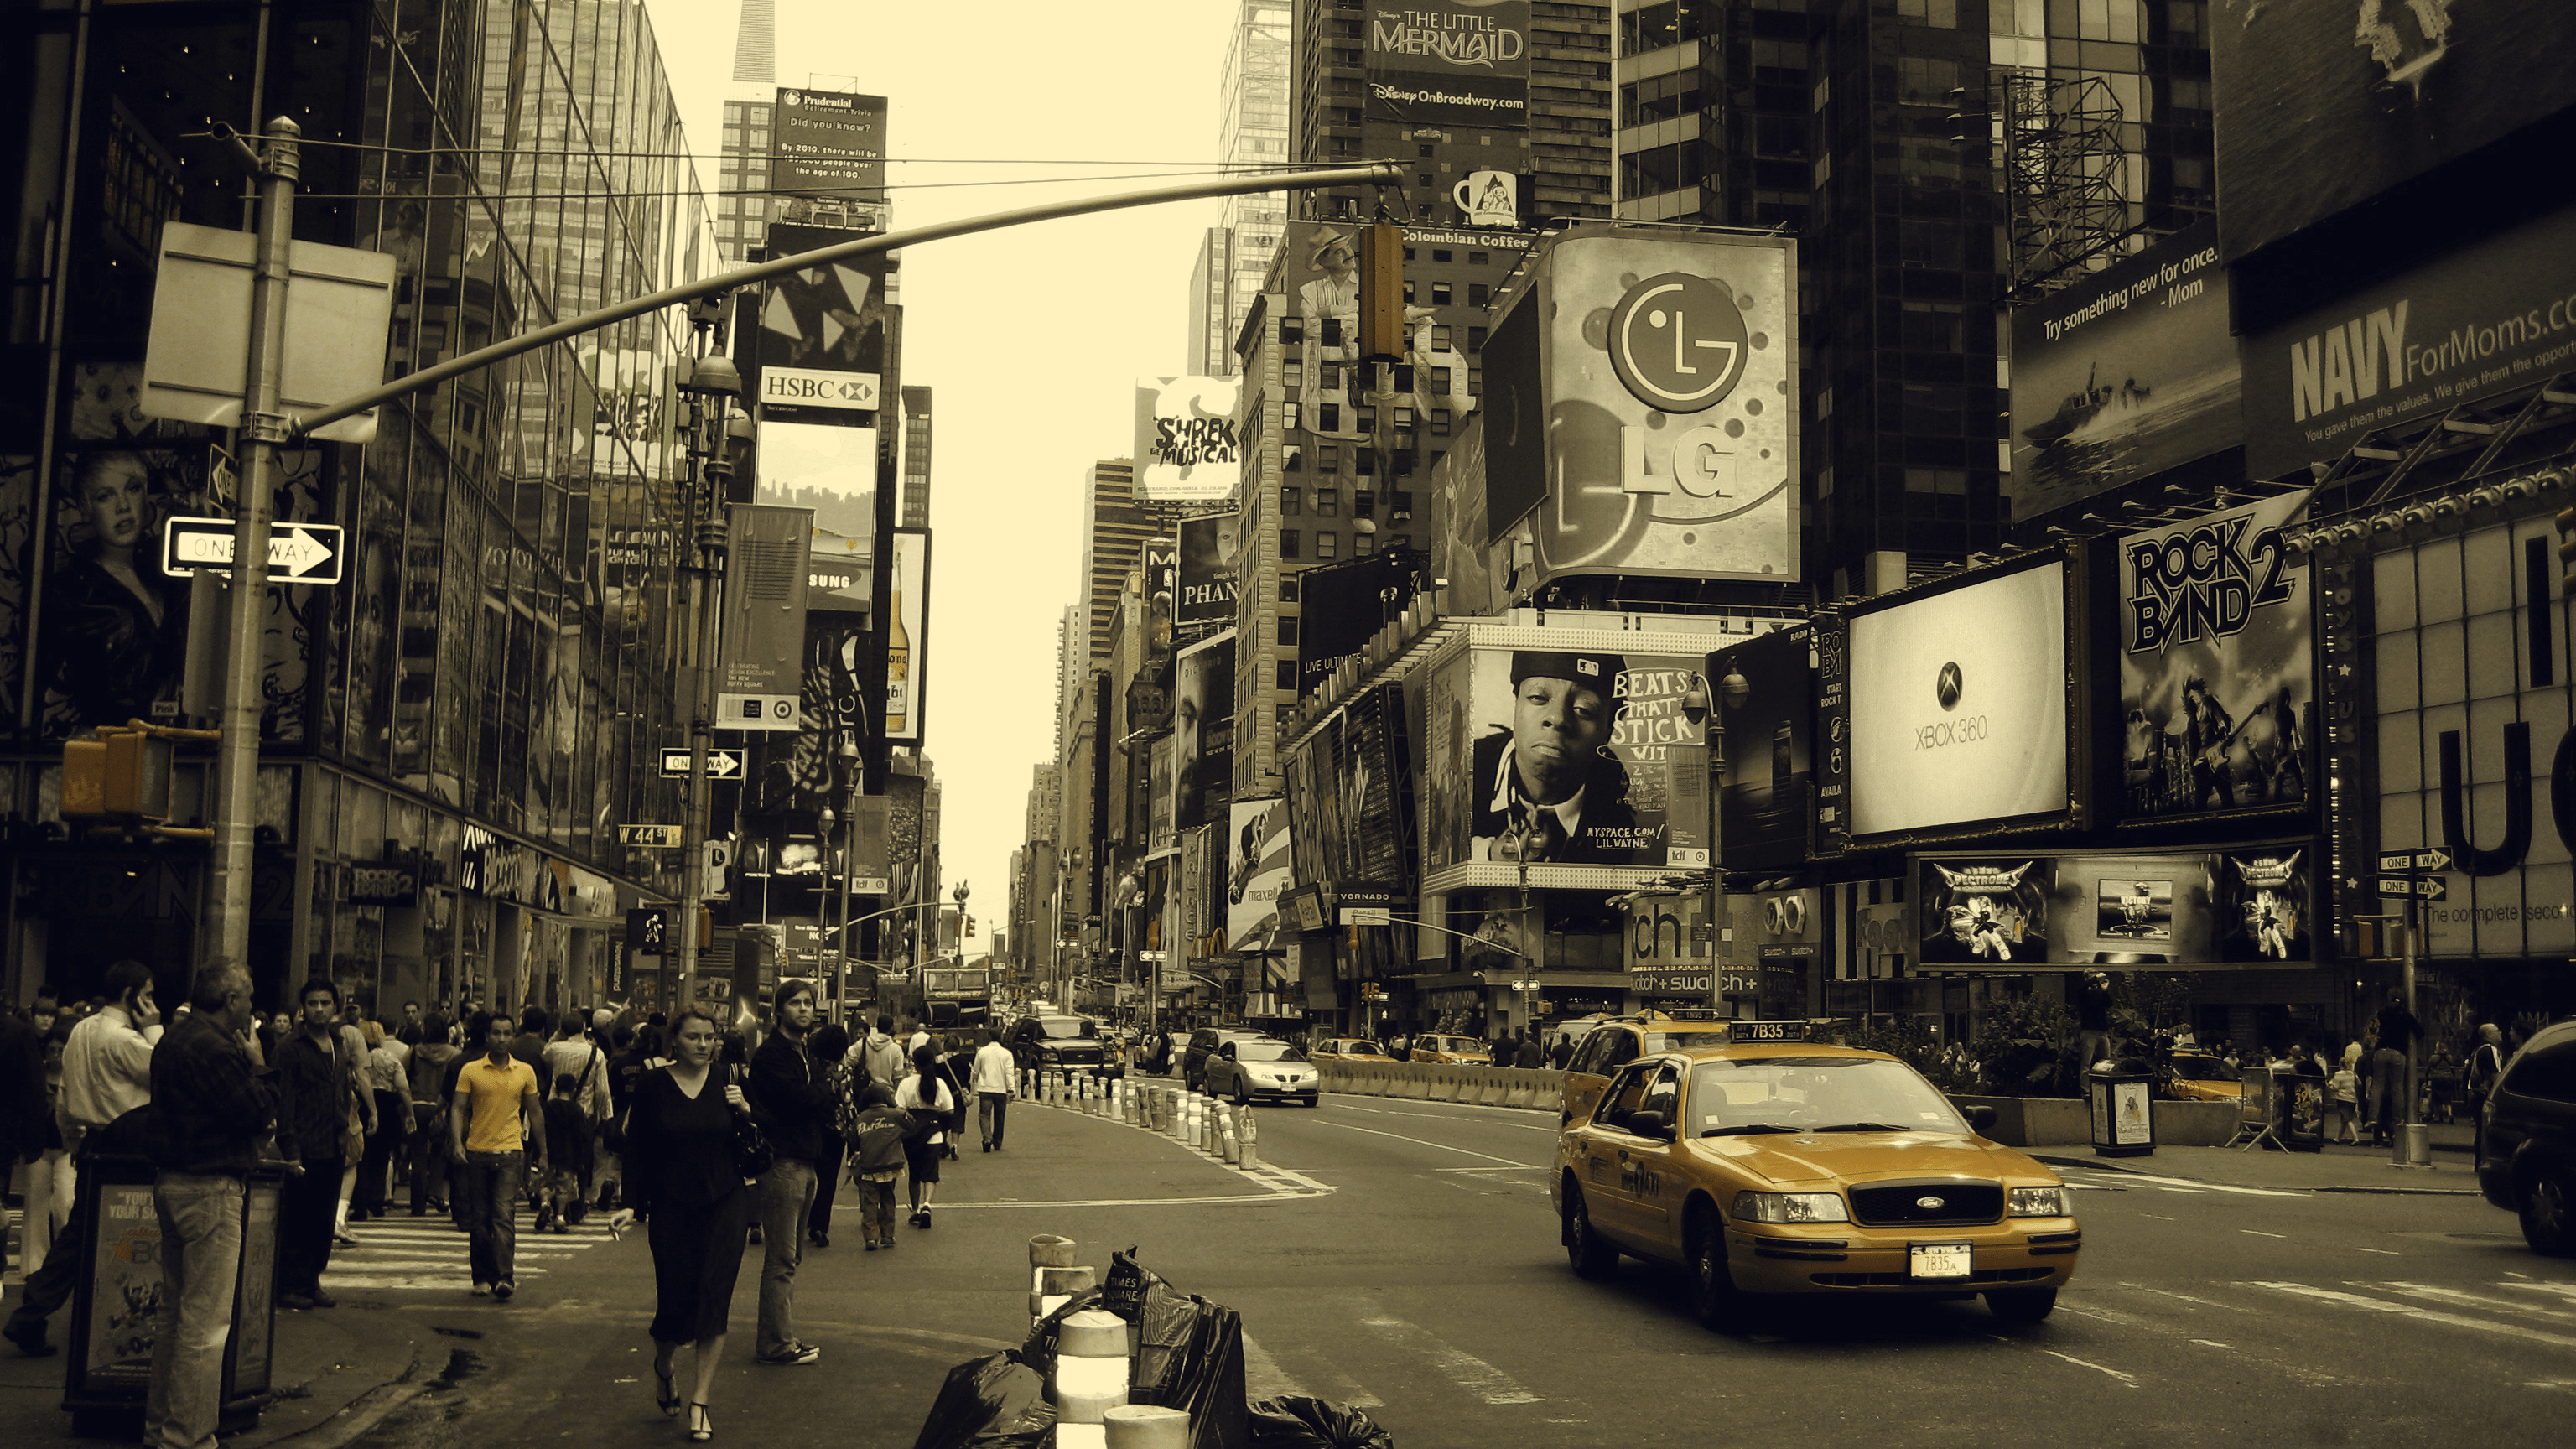 A city street with many people walking - Broadway, New York